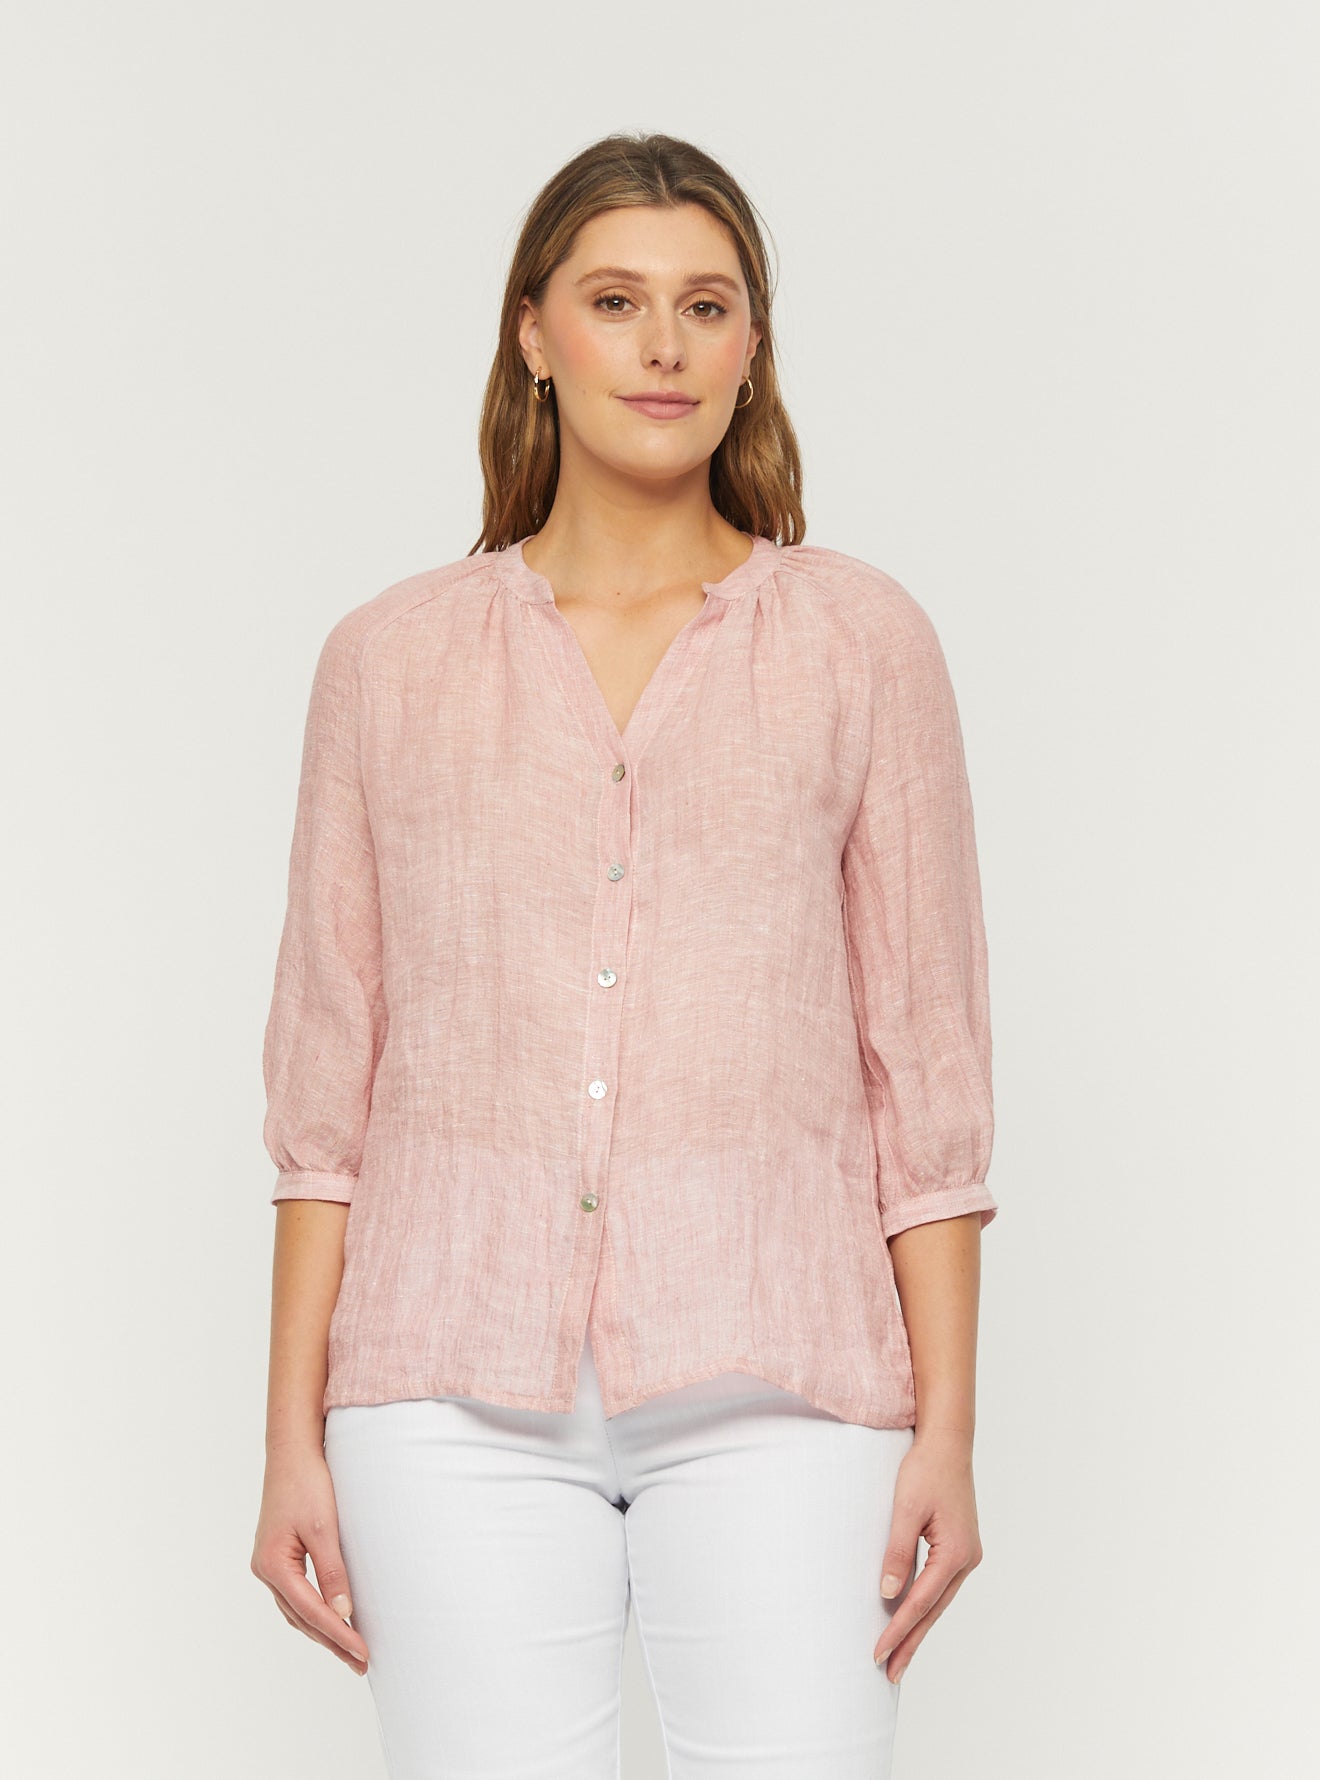 Riviera Buttoned Blouse